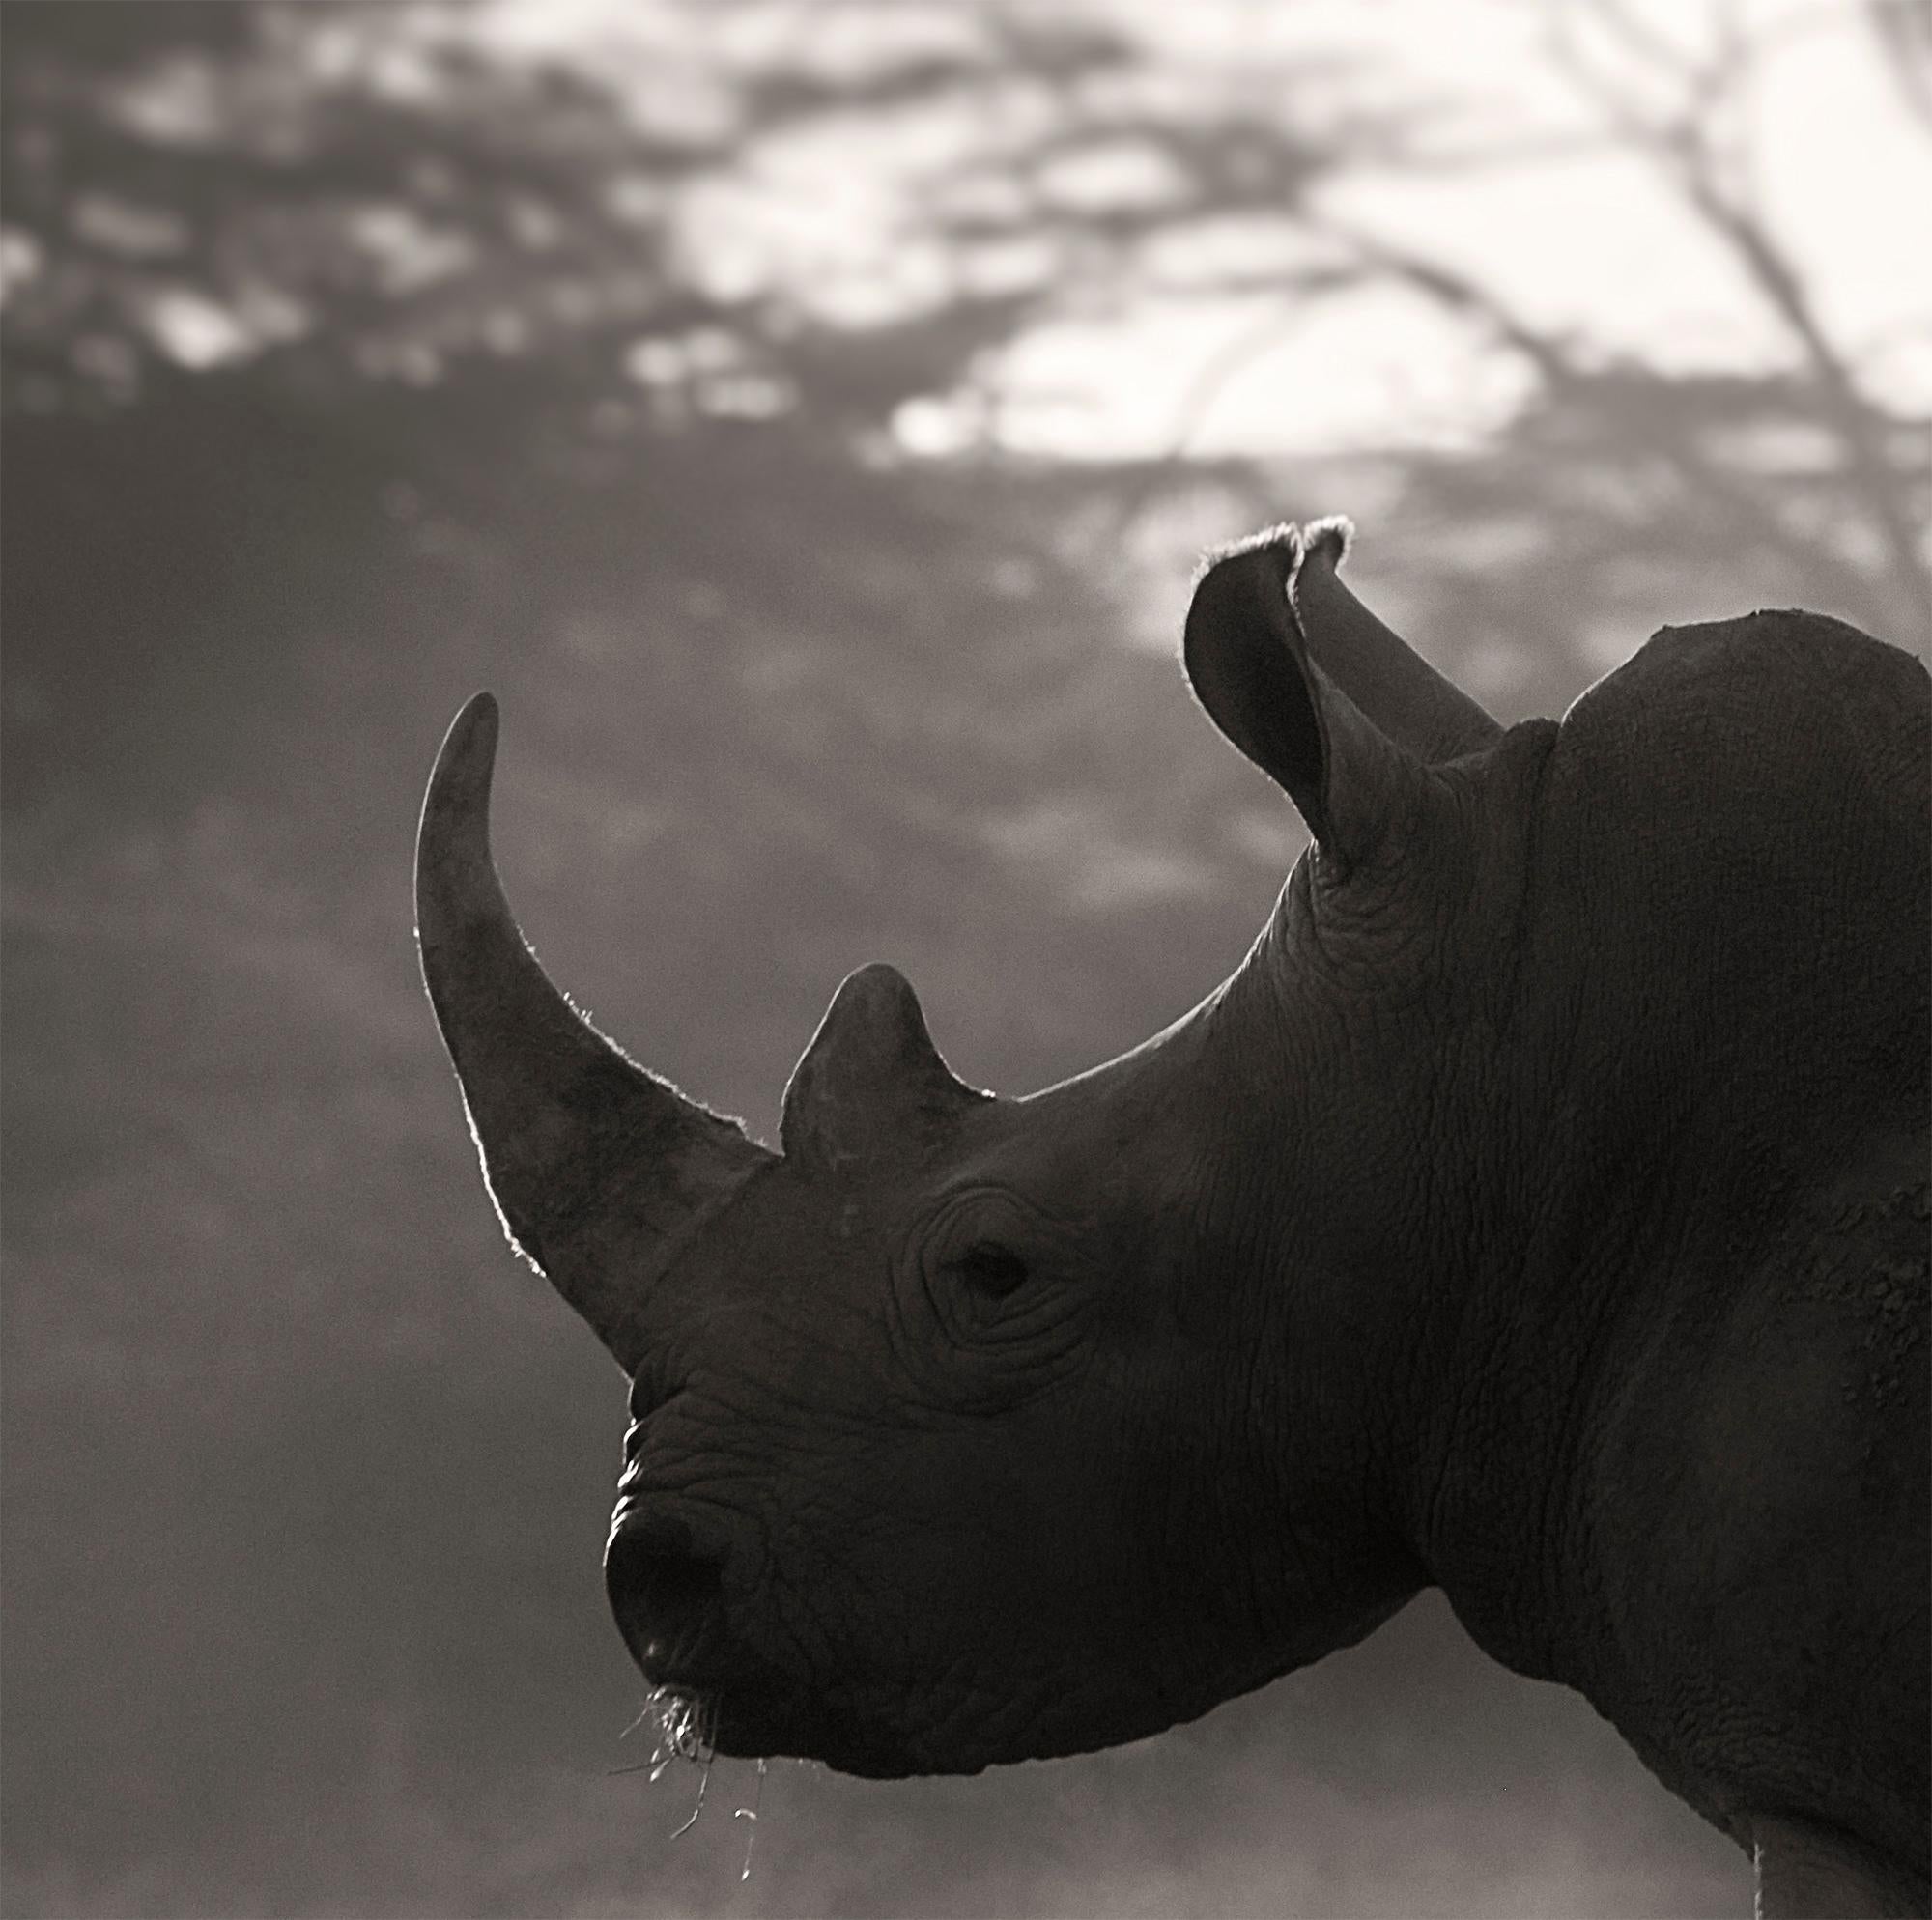 Cut in Stone, Platinum, animal, wildlife, black and white photography, rhino - Contemporary Photograph by Joachim Schmeisser